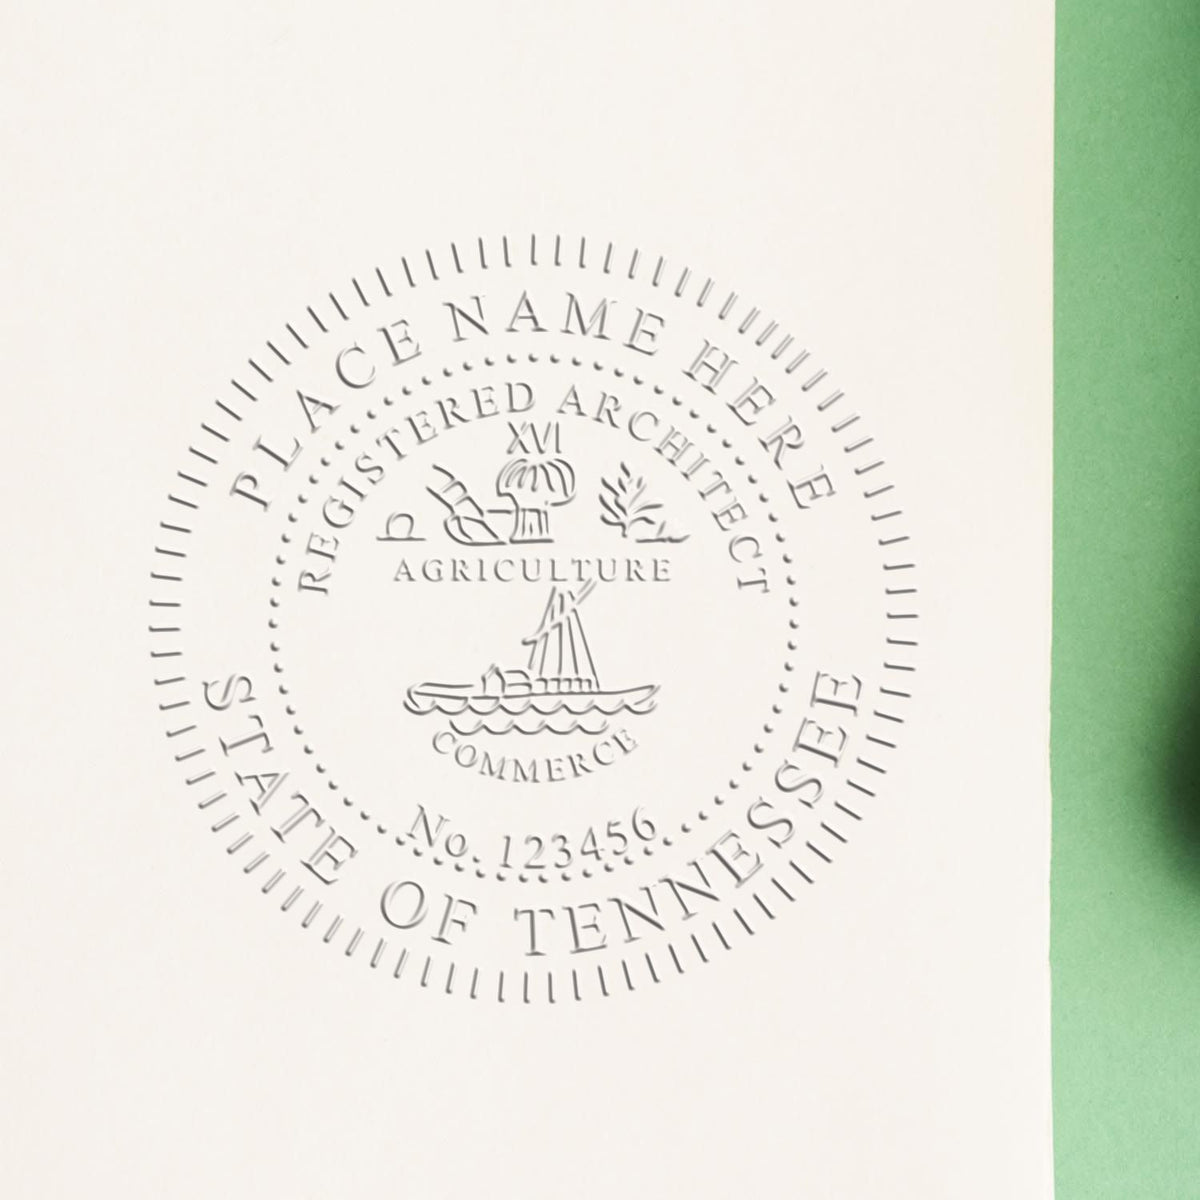 The State of Tennessee Architectural Seal Embosser stamp impression comes to life with a crisp, detailed photo on paper - showcasing true professional quality.